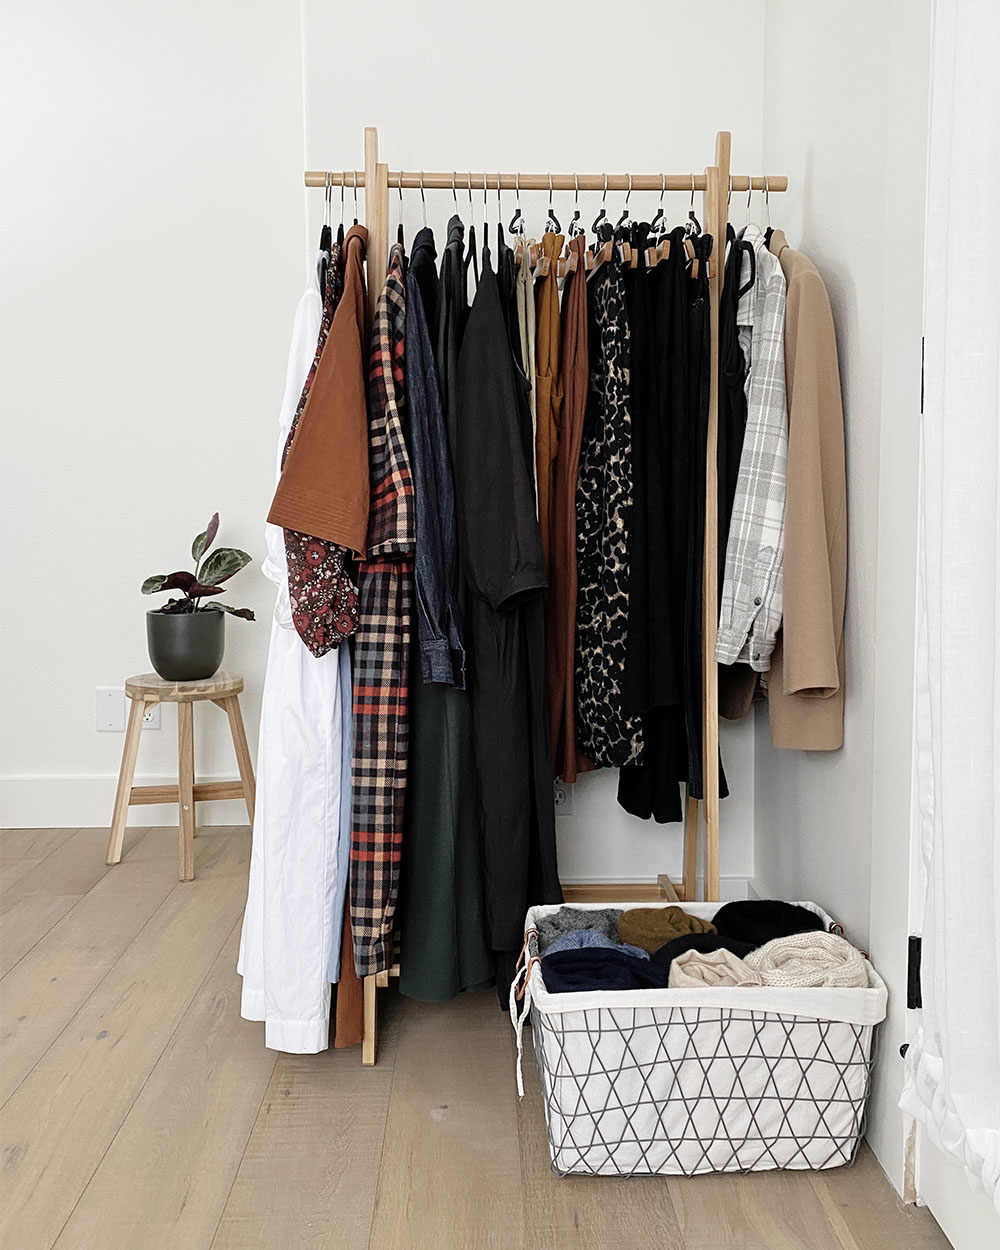 A photo of my winter capsule wardrobe. 29 items of clothes are displayed on a wooden clothing rack and in a basket next to the rack. Try a capsule wardrobe to stop shopping.